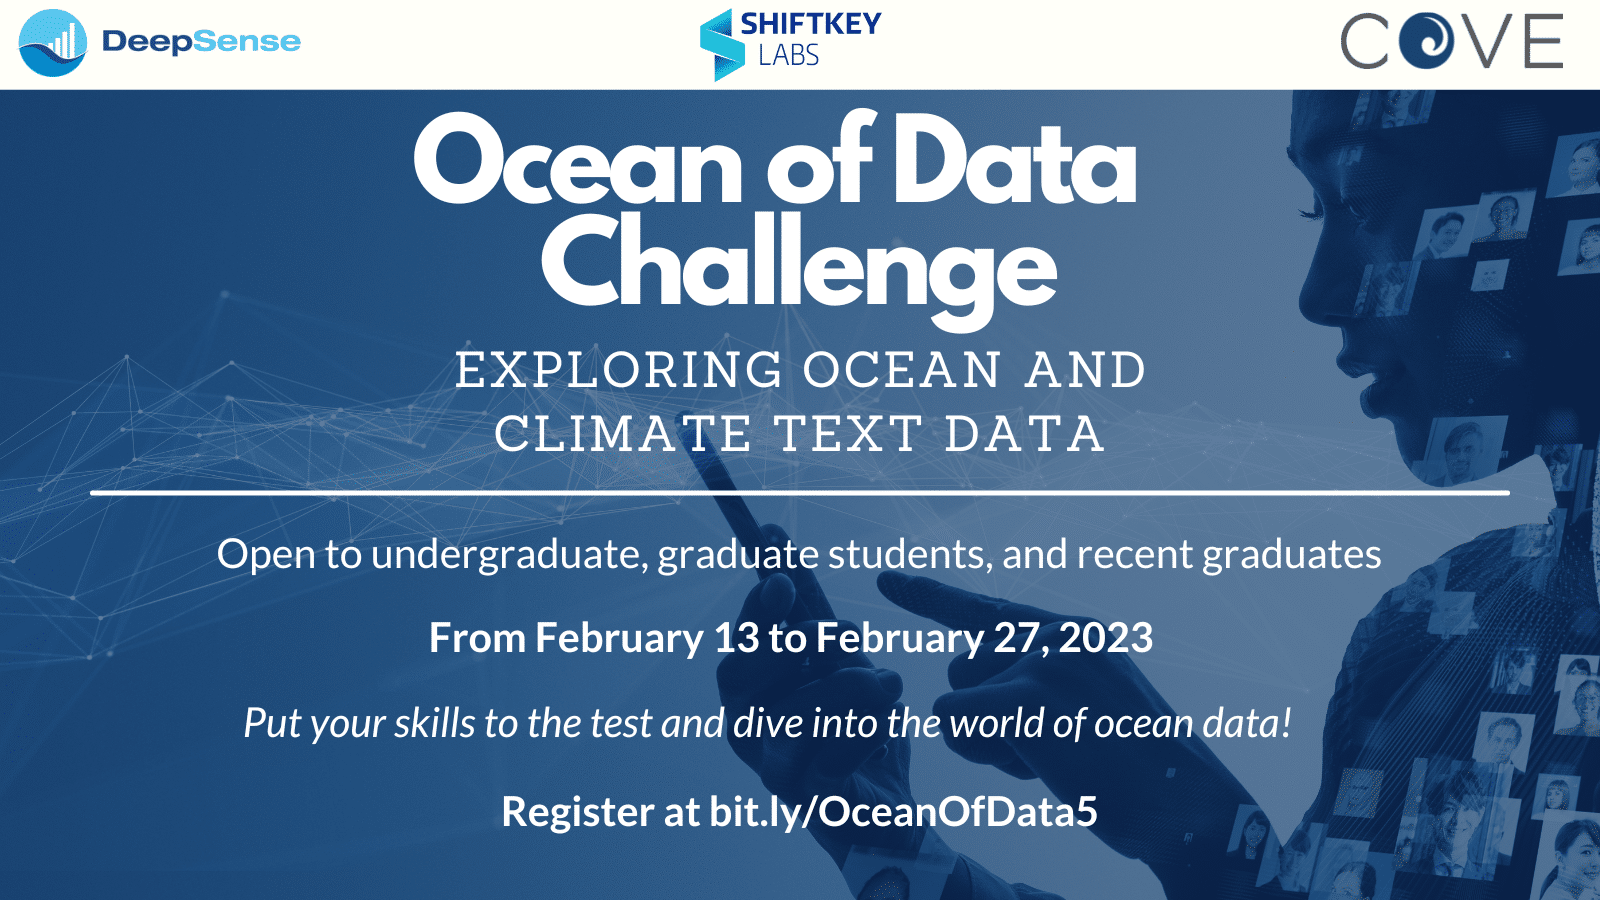 Ocean of Data Challenge: Exploring Ocean and Climate Text Data